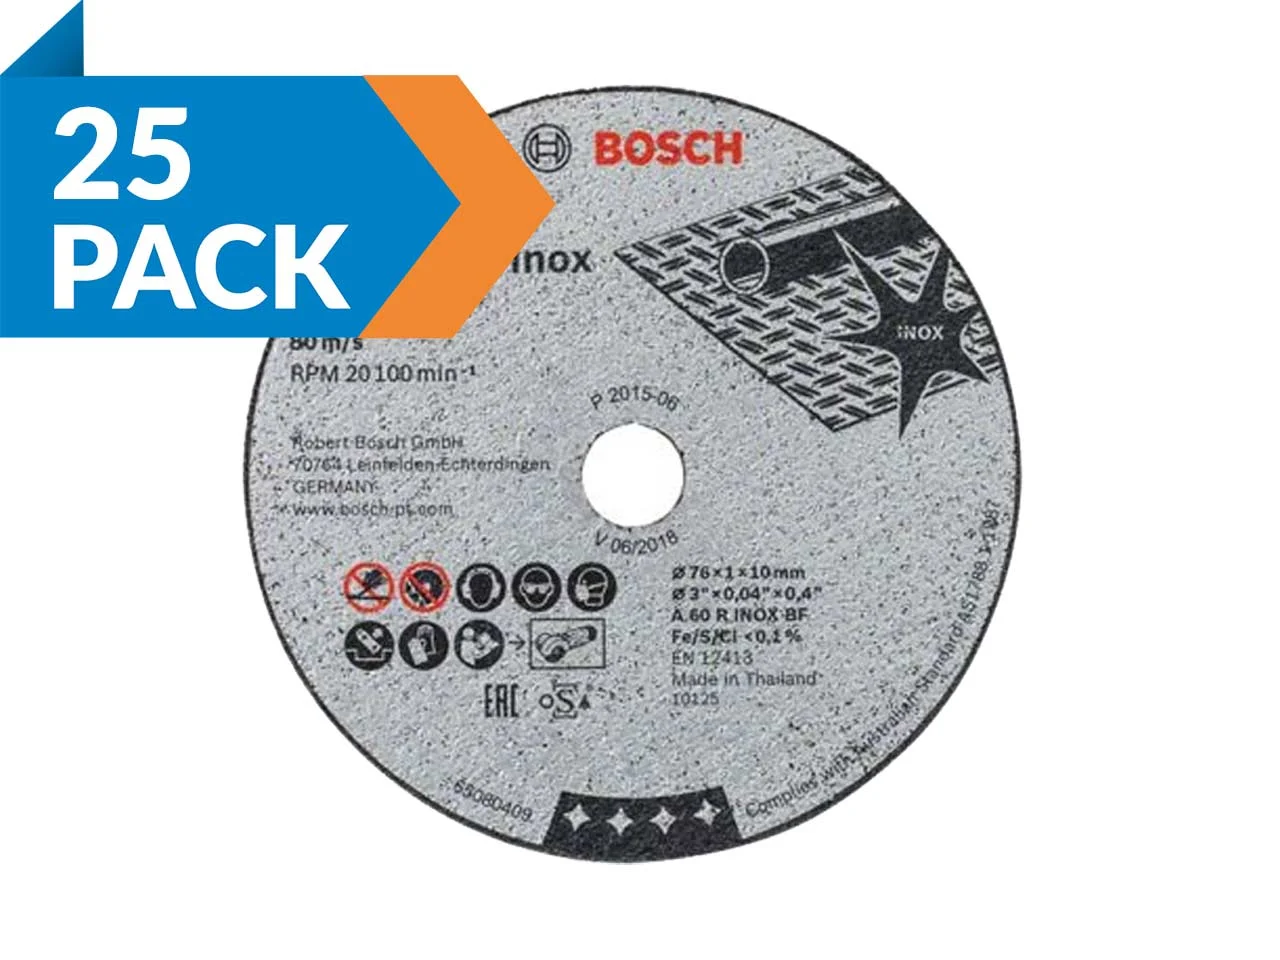 Holex INOX Thin Cutting Discs Available in 115 mm and 125 mm